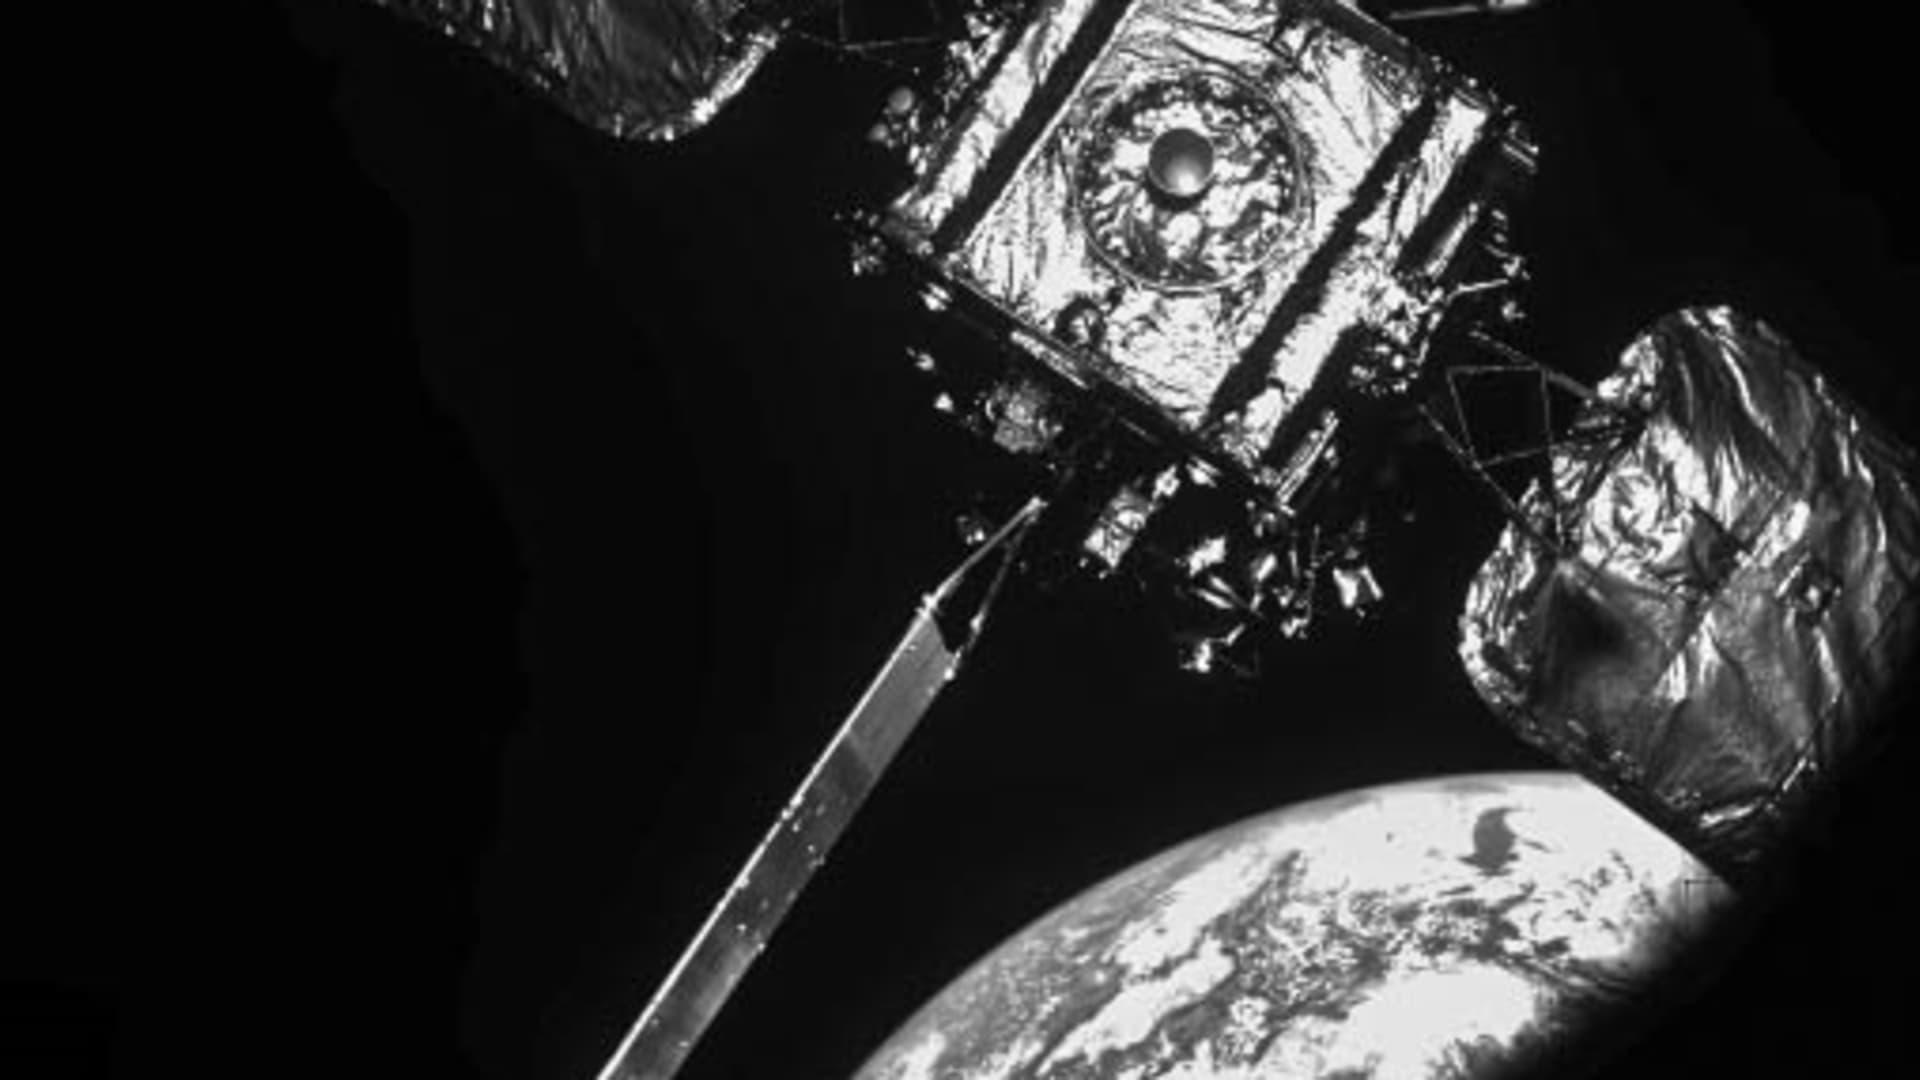 A close up look at Intelsat's IS-10-02 satellite as MEV-2 approached for docking in orbit.